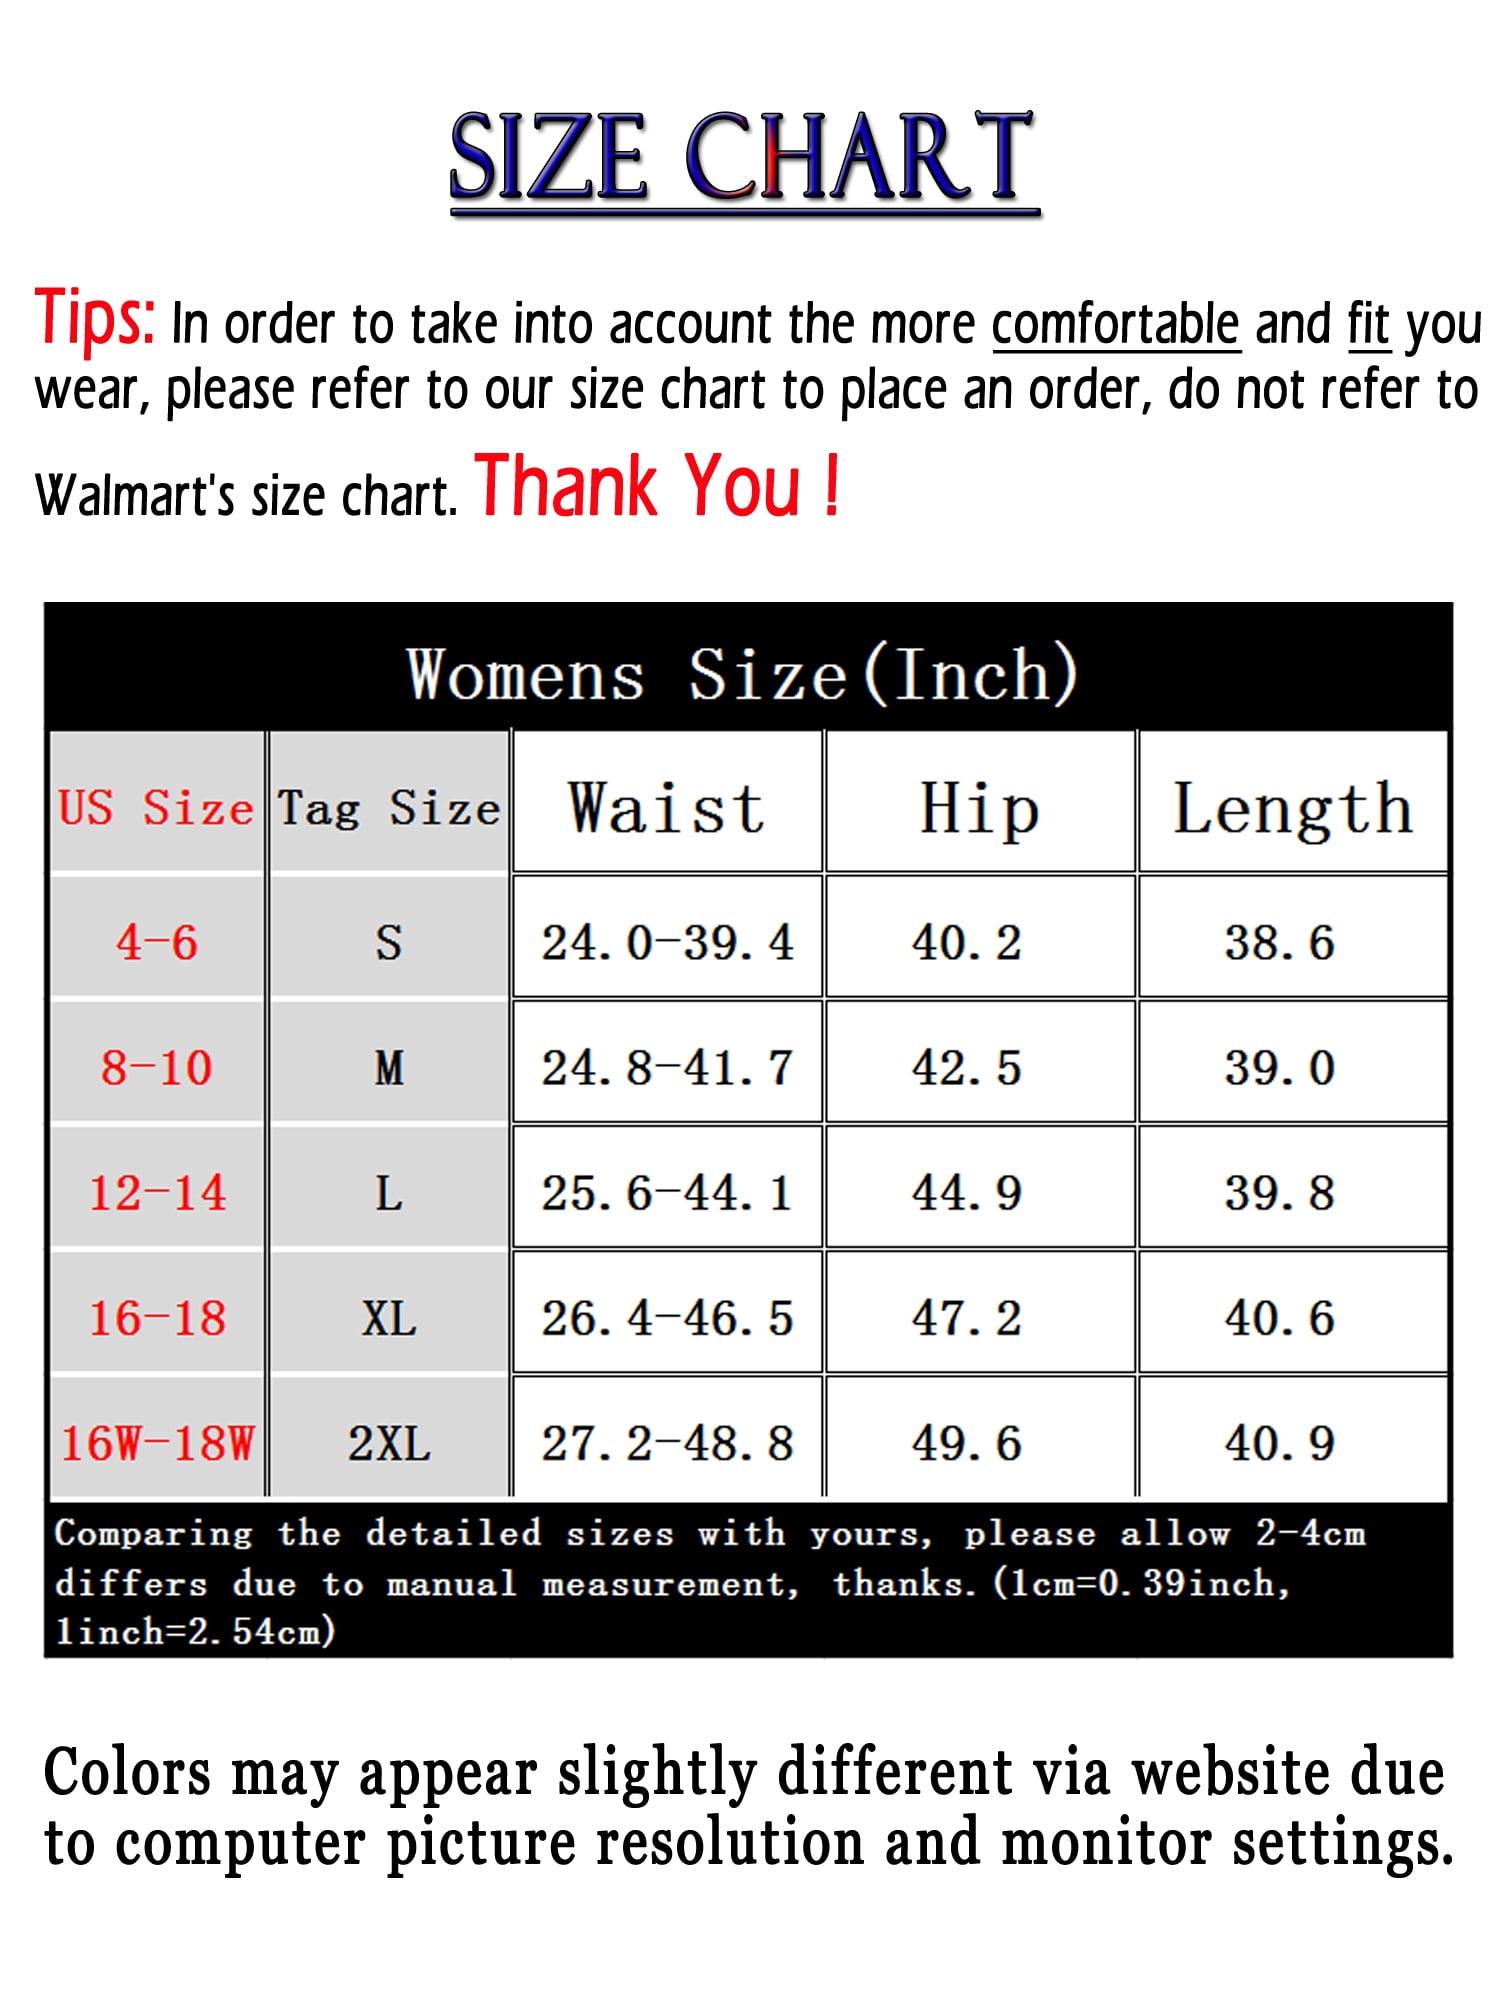 LELINTA Women's Big and Tall Active Yoga Sweatpants Workout Joggers Pants  Lounge Sweat Pants with Pockets, Red/ Purple / Blue/ Pink, S-2XL 